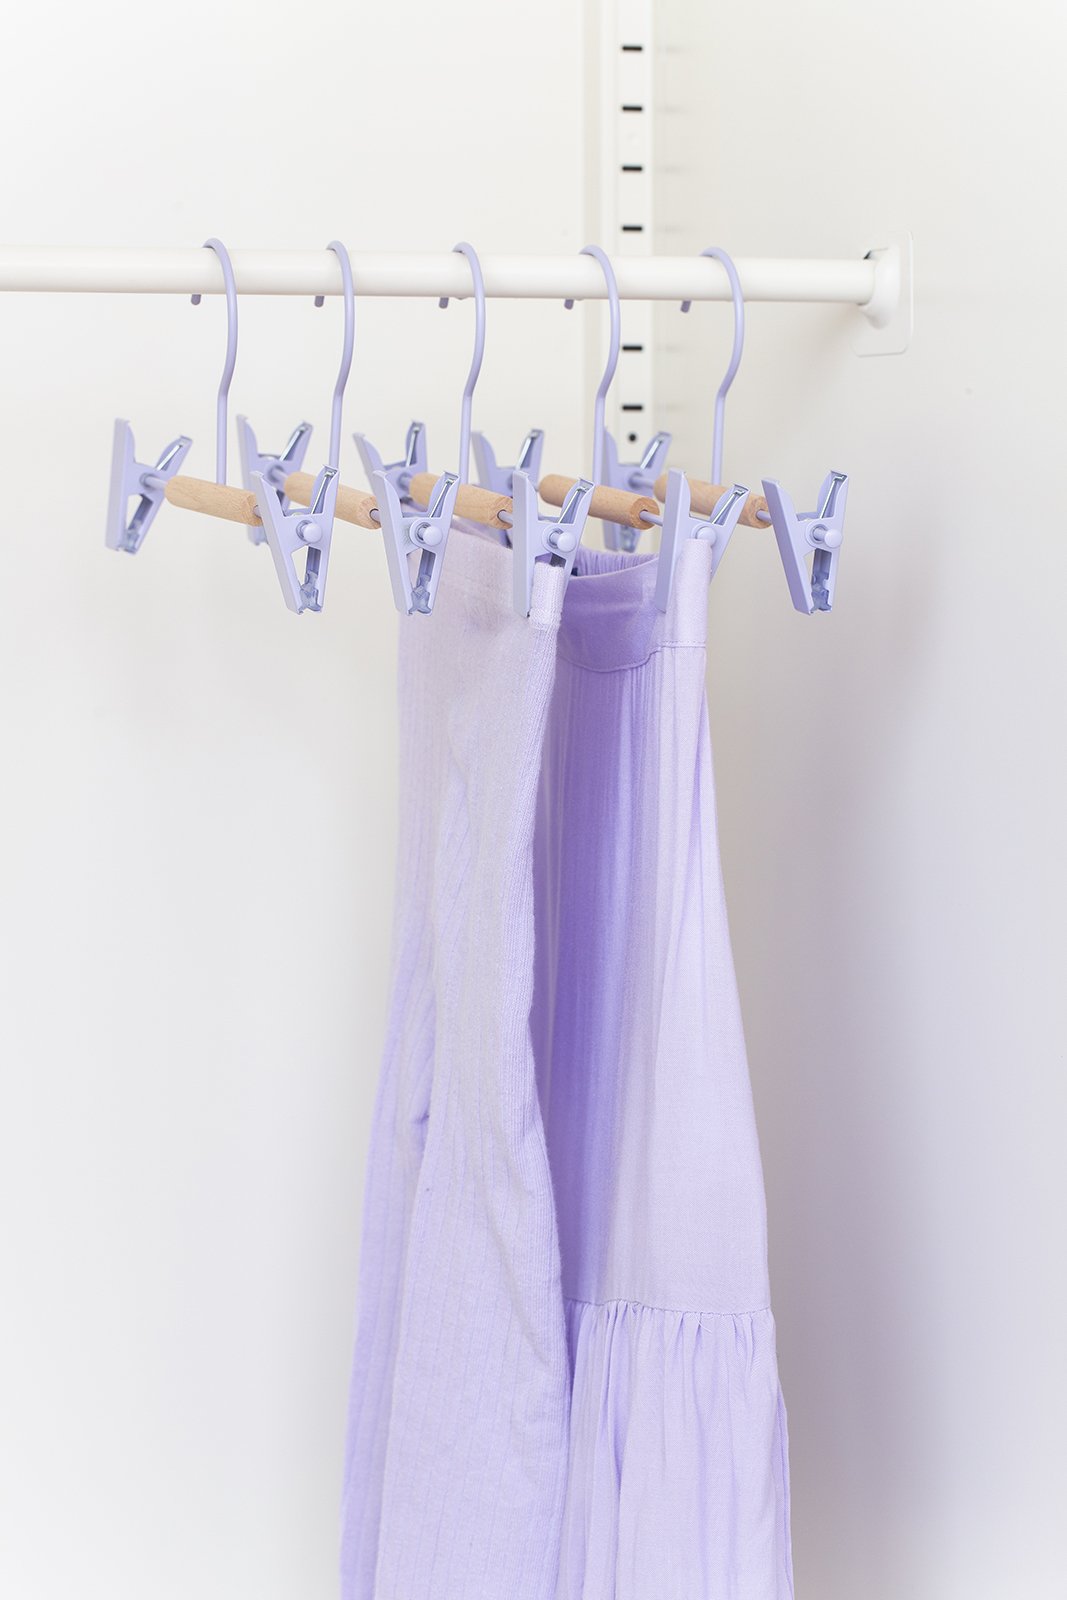 Mustard Made Kids Clip Hangers in Lilac Pack of 5